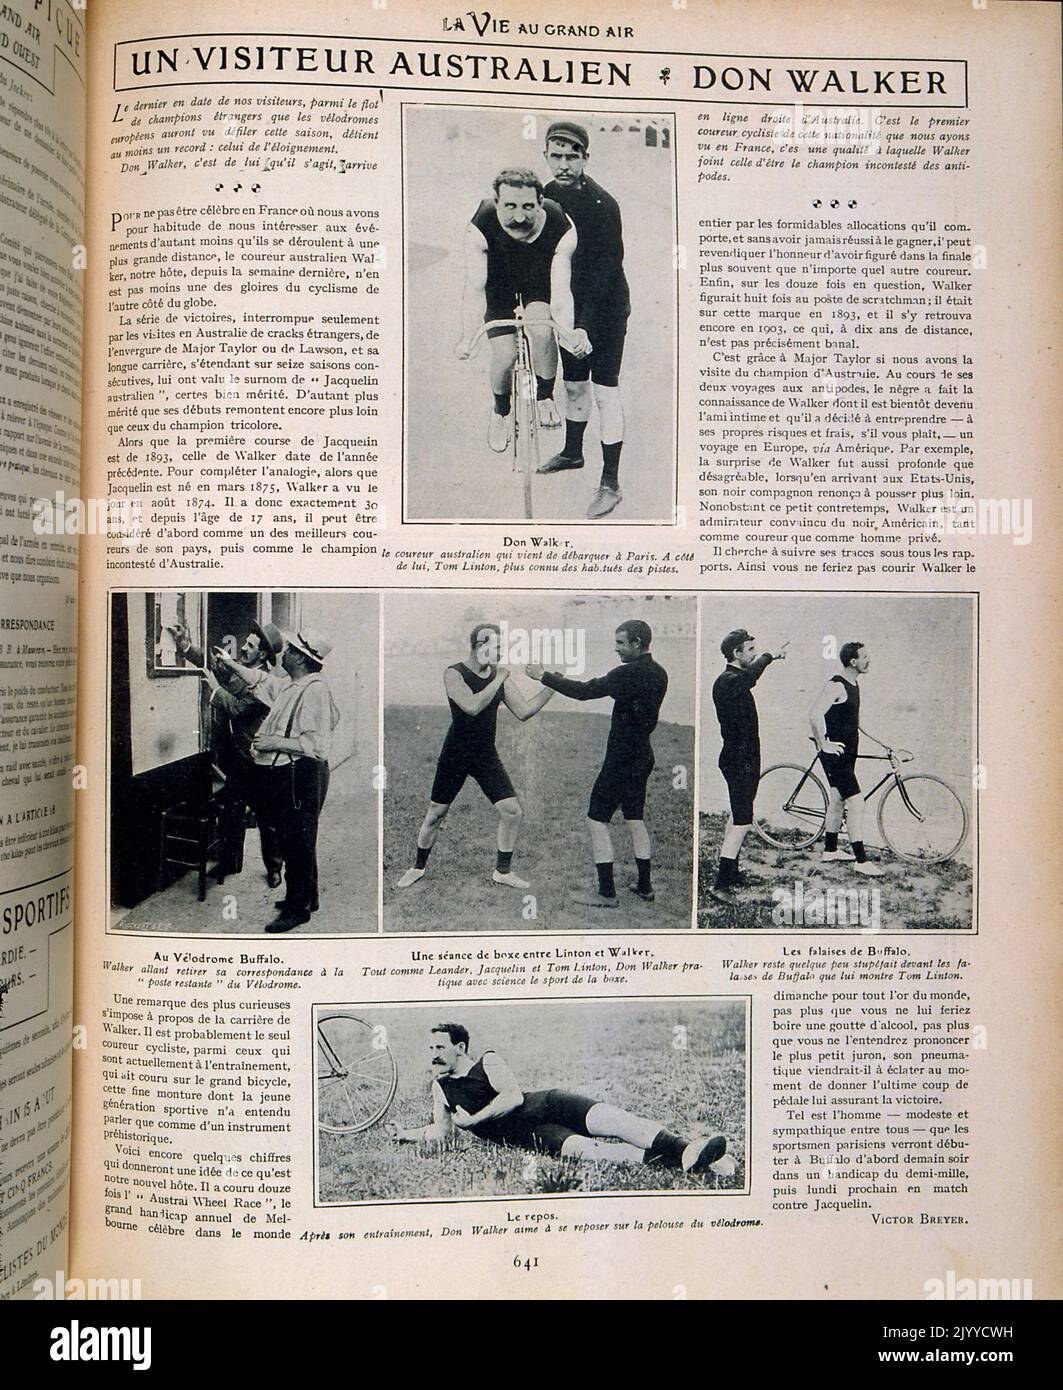 From the magazine La Vie au Grand Air (Life in the Outdoors); Black and white photographs of cycling and boxing. They show the Australian visitor Don Walker participating in various sporting activities. Stock Photo